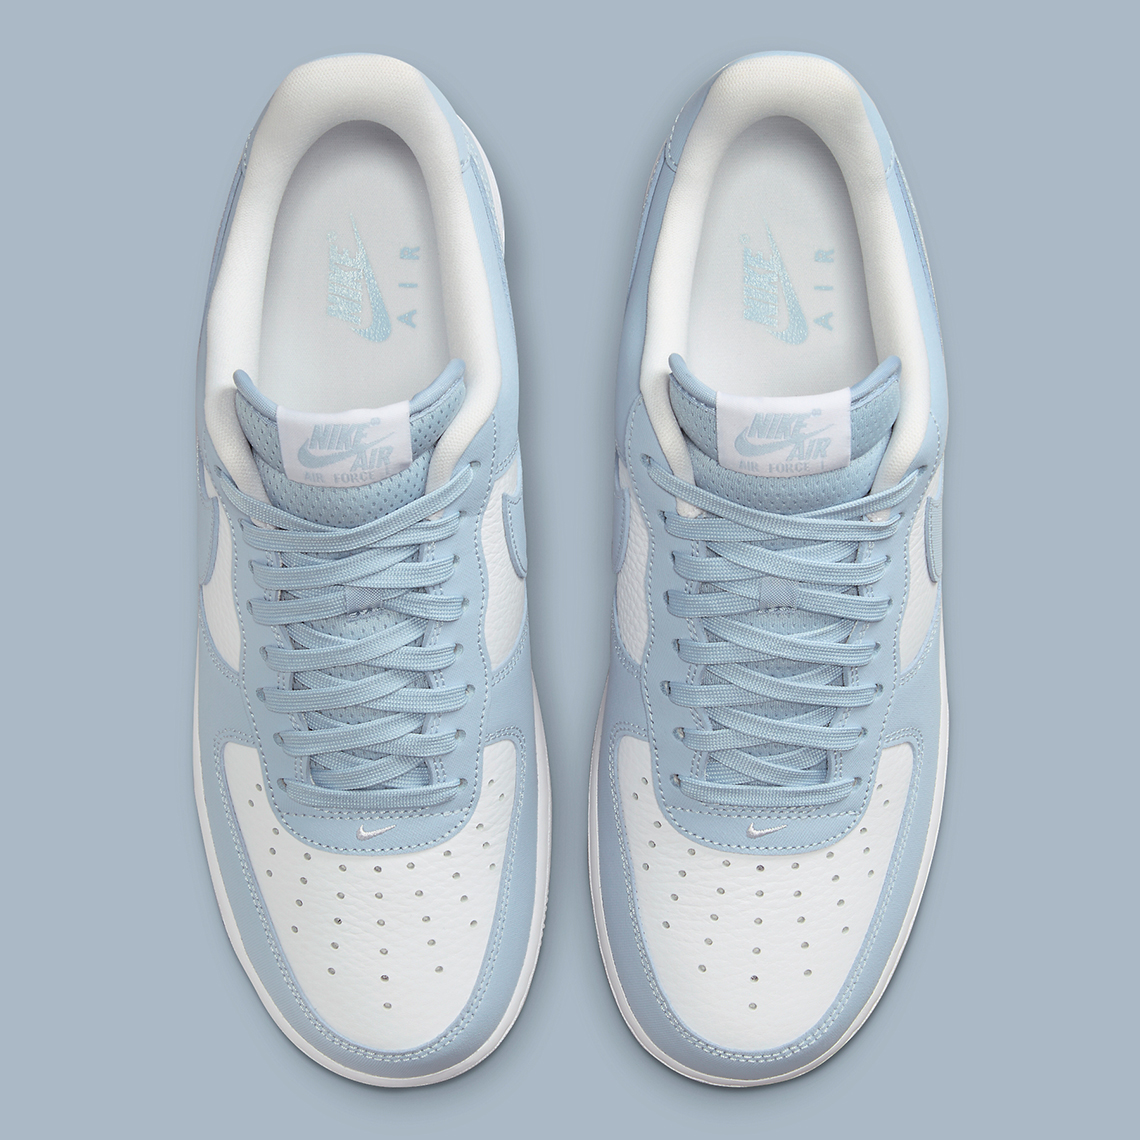 nike air force 1 low belly swoosh blue white FZ4627 400 1